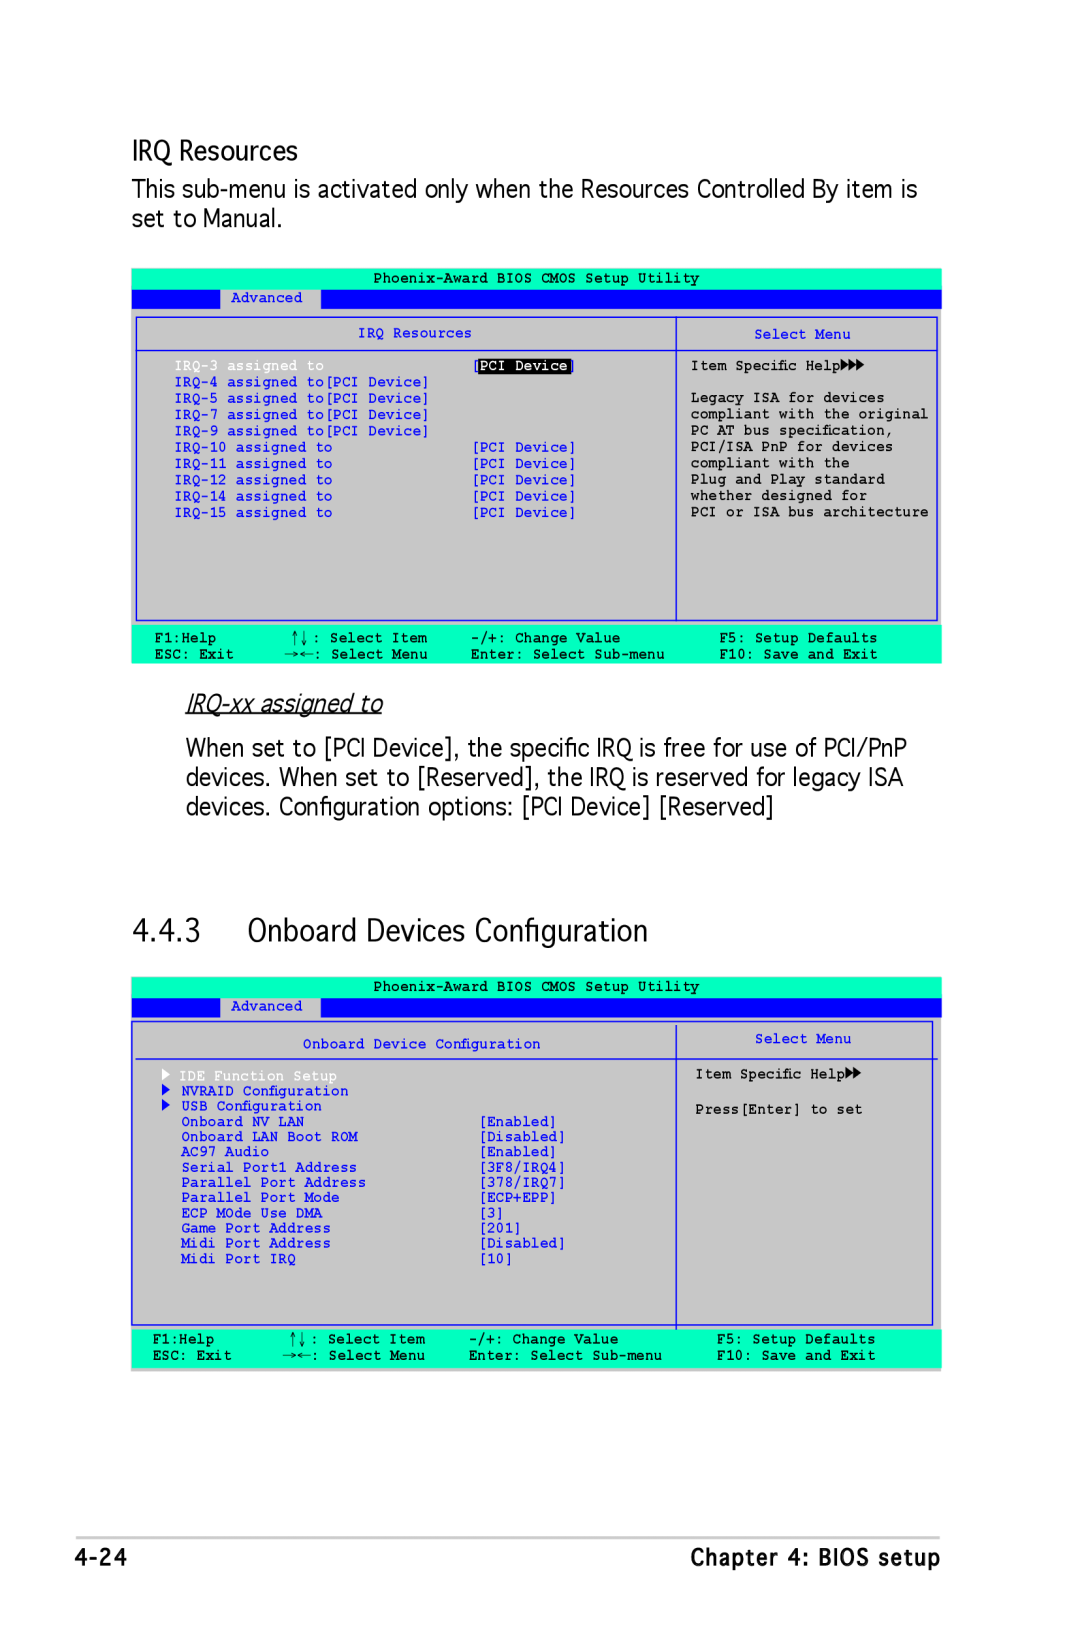 Asus A8N-SLI SE manual Onboard Devices Conﬁguration, IRQ Resources, IRQ-xx assigned to 